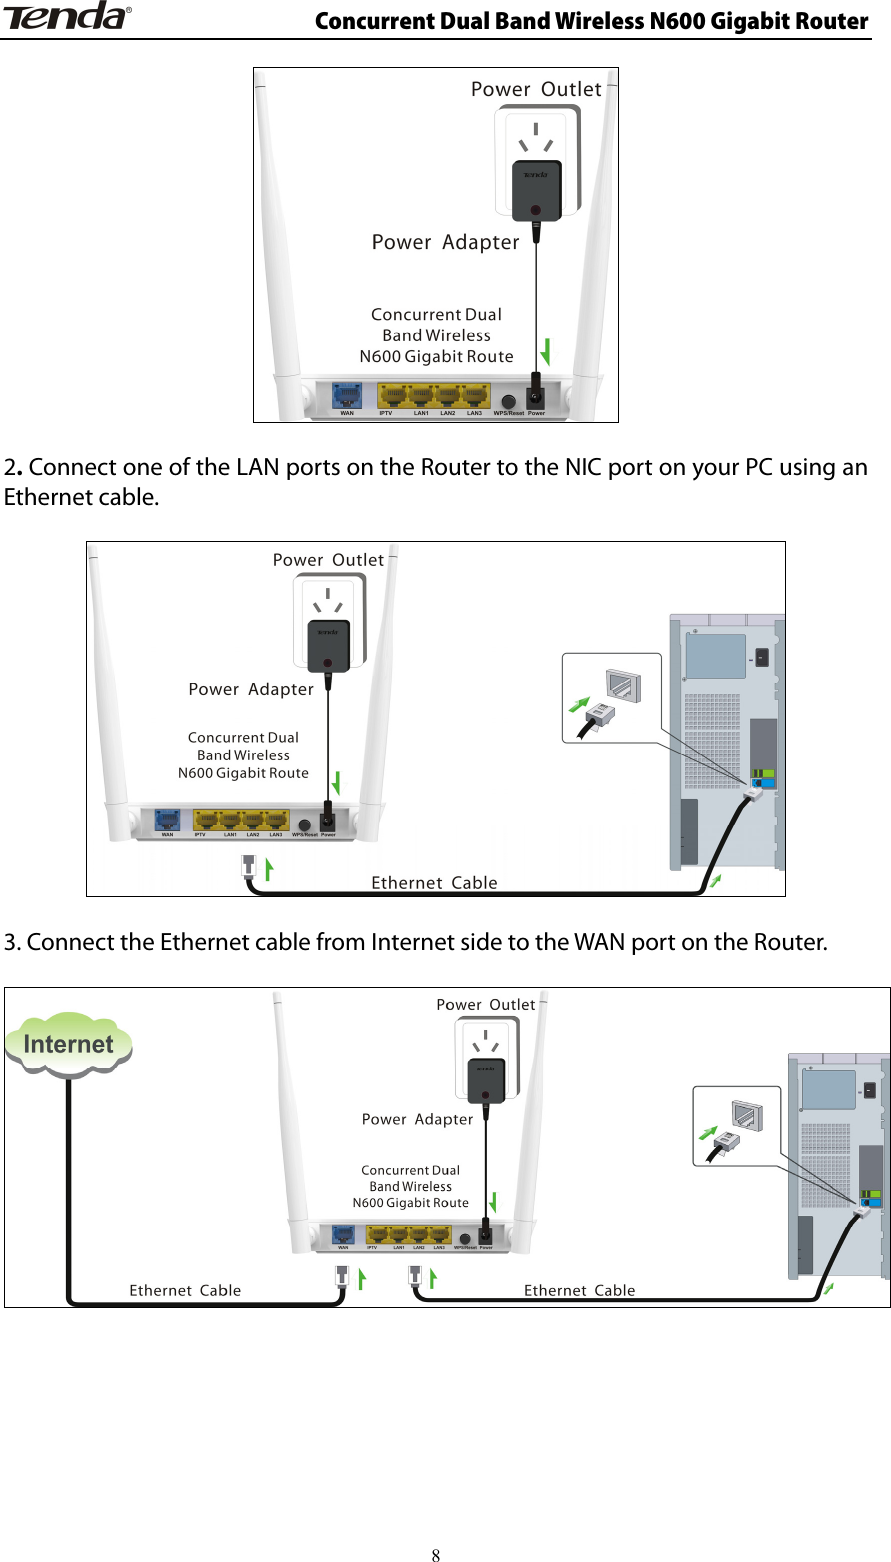                      Concurrent Dual Band Wireless N600 Gigabit Router   2. Connect one of the LAN ports on the Router to the NIC port on your PC using an Ethernet cable.    3. Connect the Ethernet cable from Internet side to the WAN port on the Router.          8